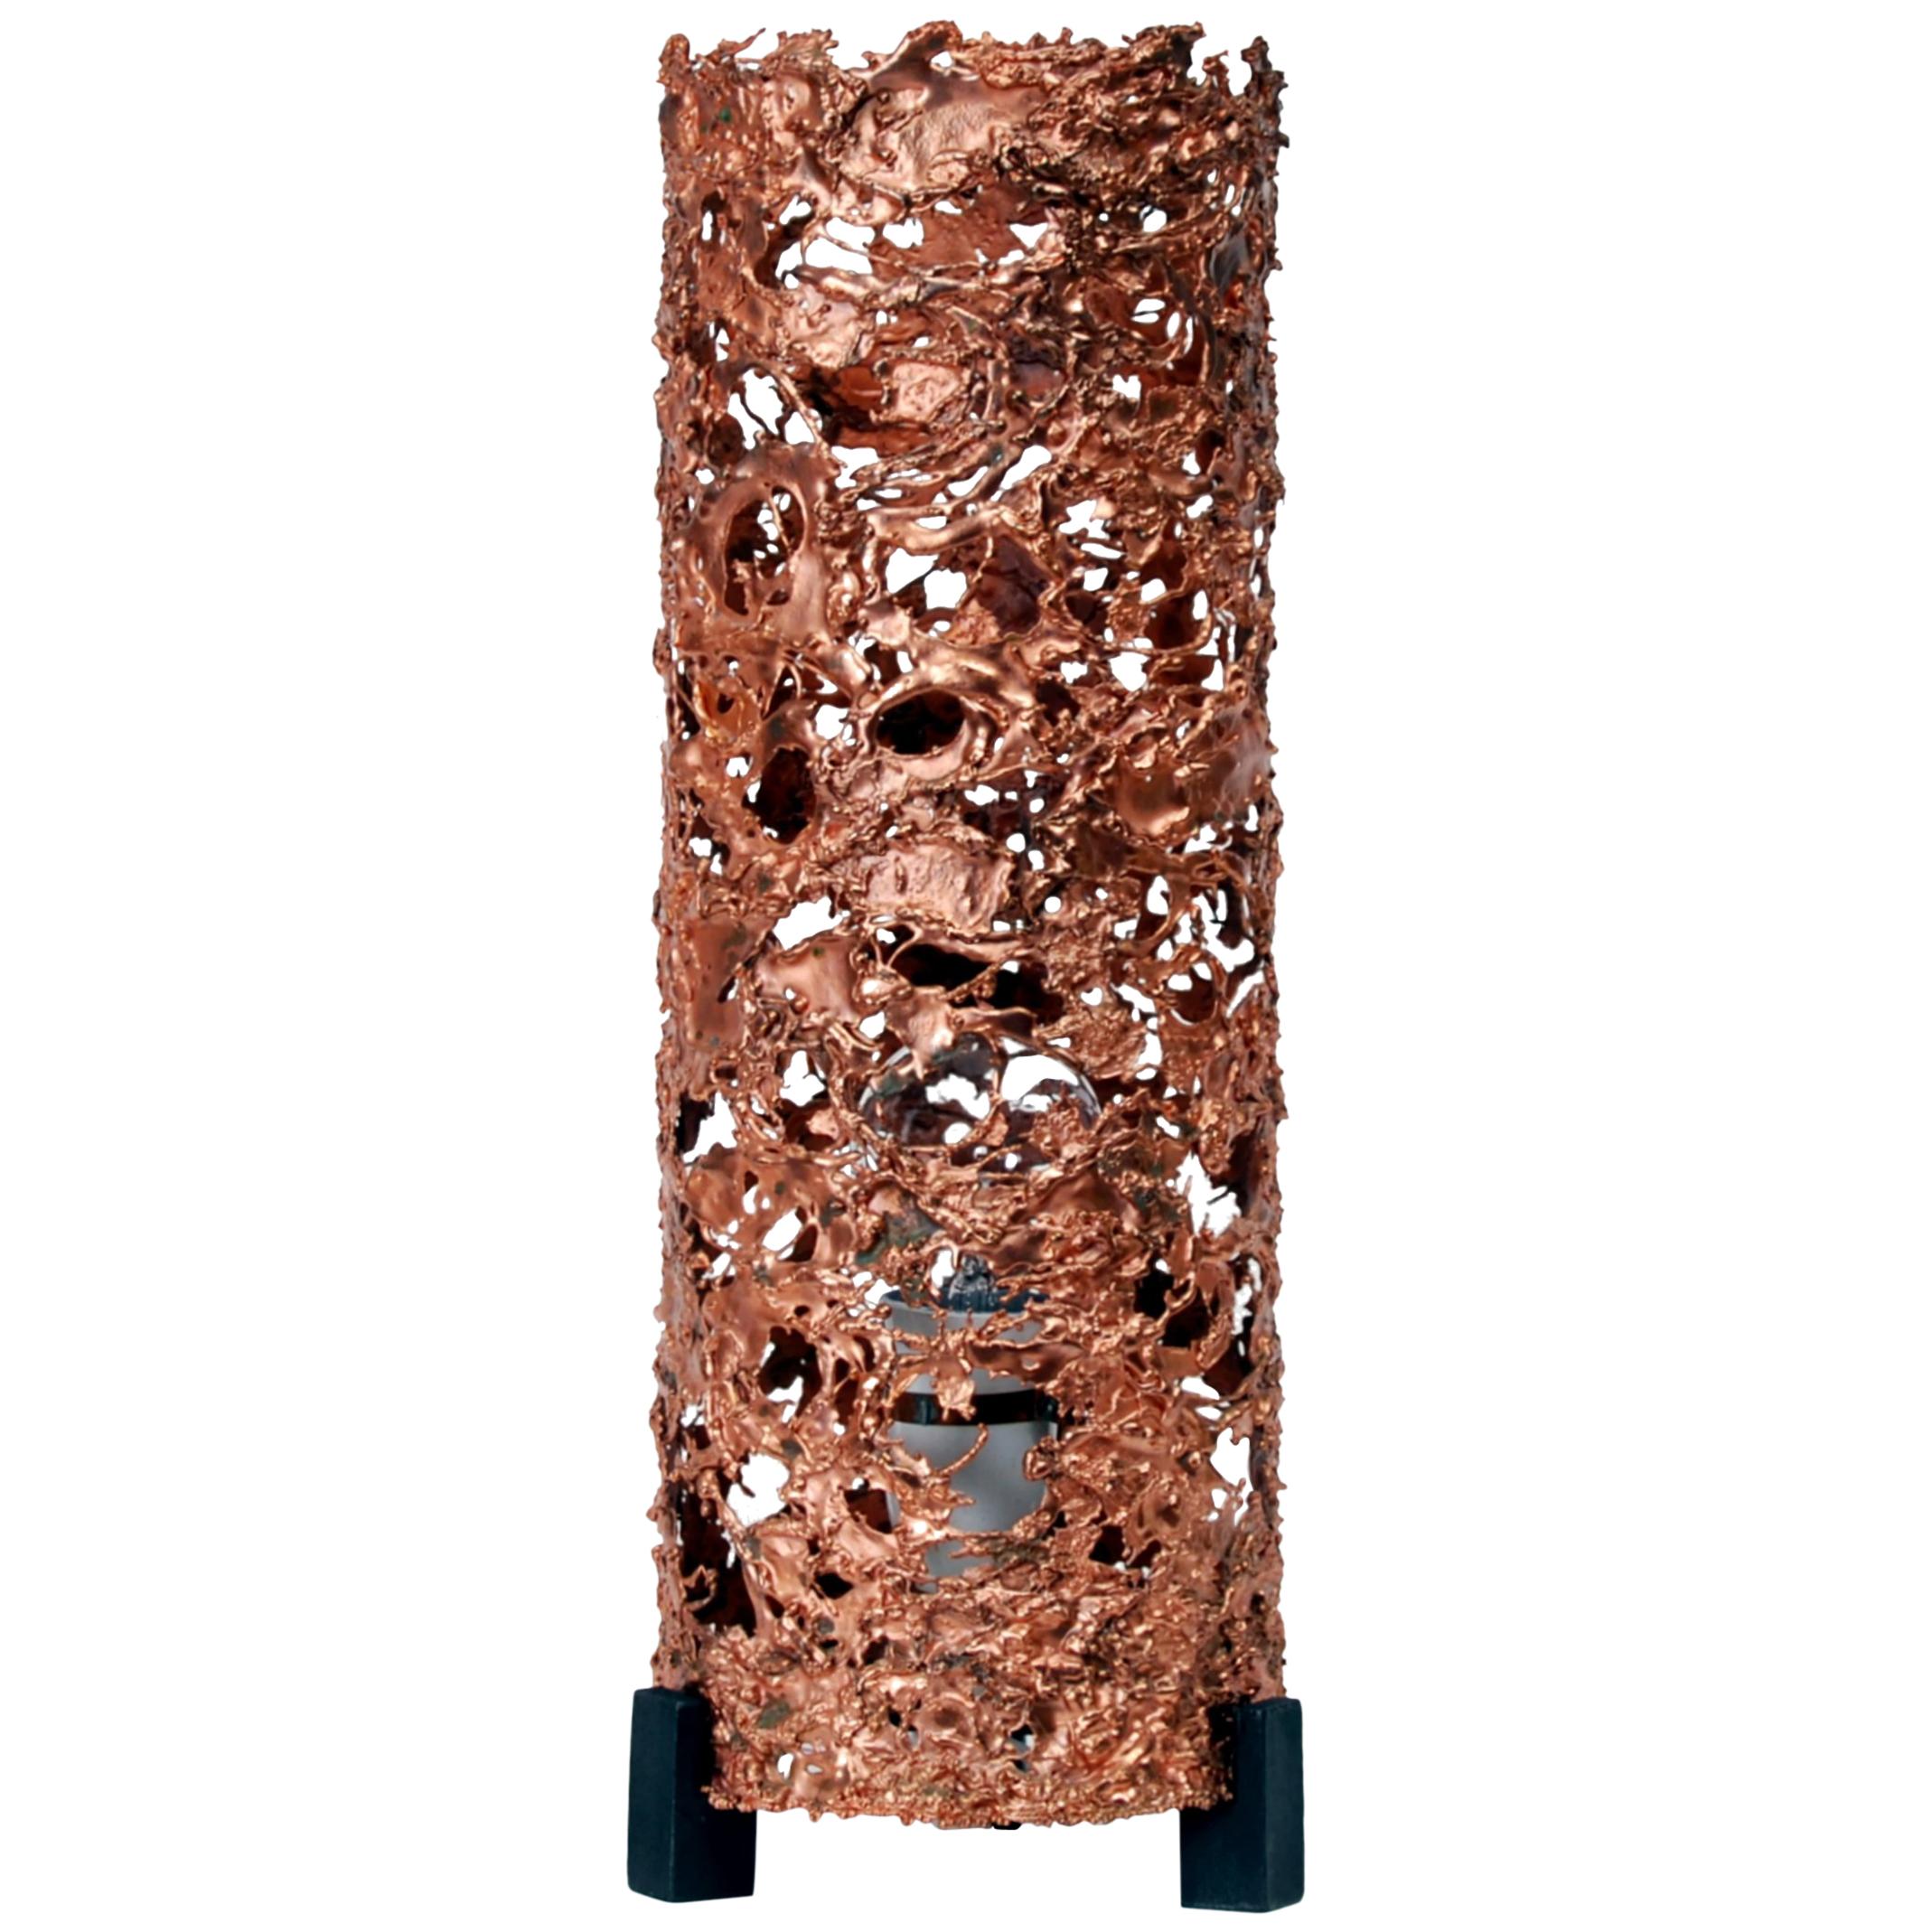 Finnish Designer Aimo Tukiainens Large Melted Copper Table Lamp, 1960s For Sale